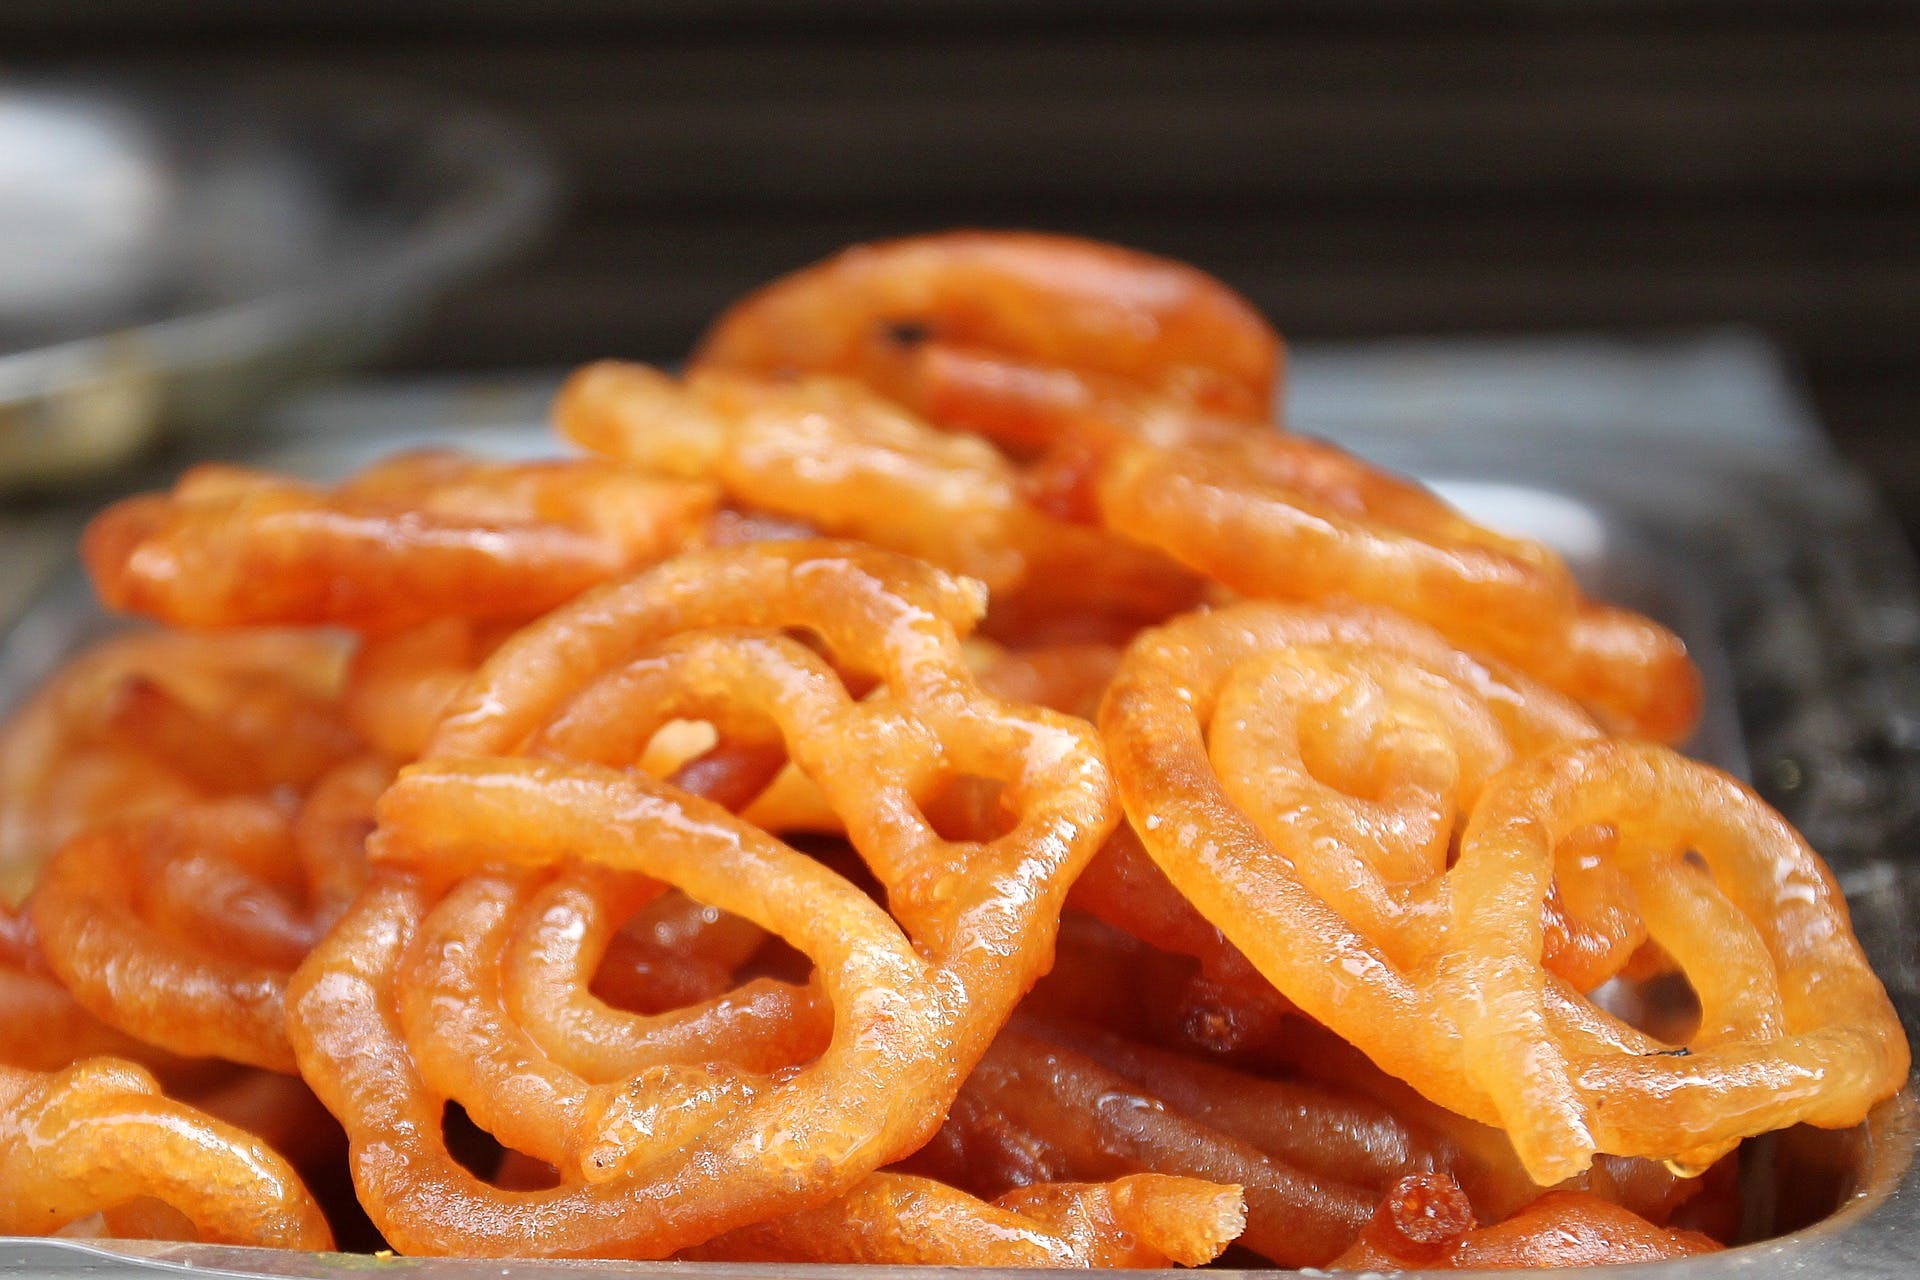 Food,Dish,Cuisine,Ingredient,Jalebi,Produce,South asian sweets,Snack,Recipe,Side dish